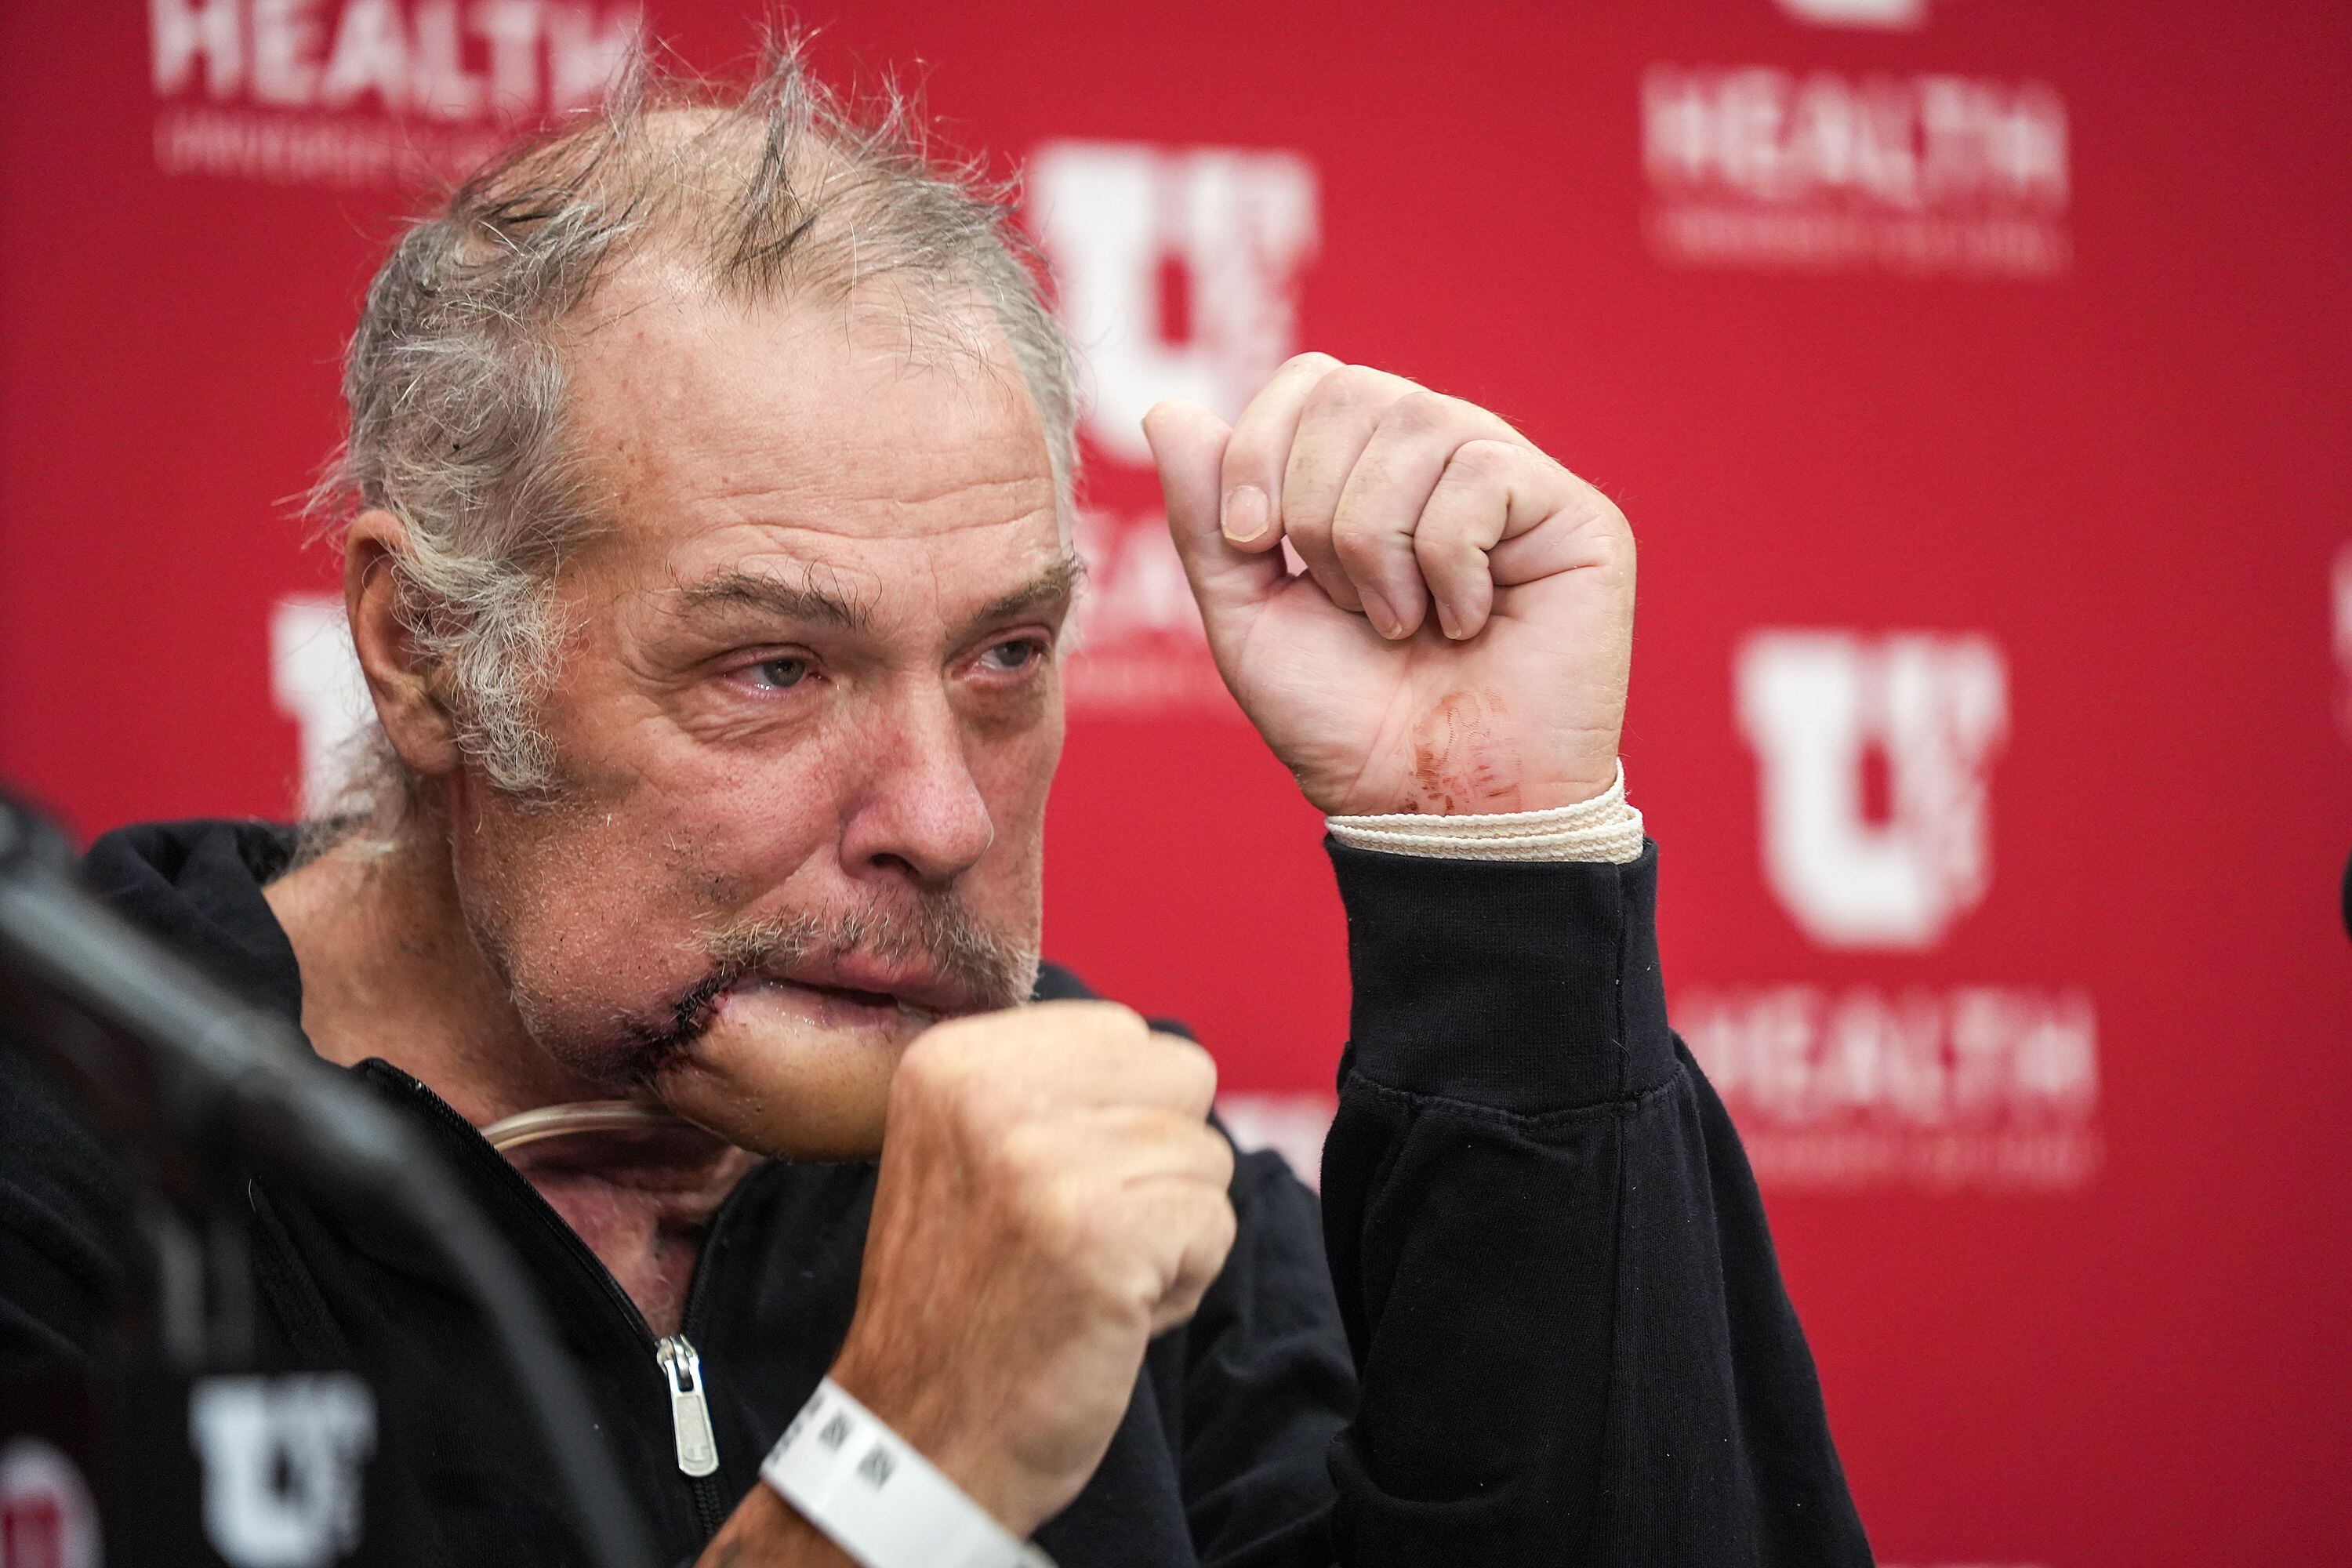 (Chris Samuels | The Salt Lake Tribune) Rudy Noorlander simulates the "round two" that he said he'll win against the bear that attacked him, during a news conference at University of Utah Hospital in Salt Lake City, Friday, Oct. 13, 2023.